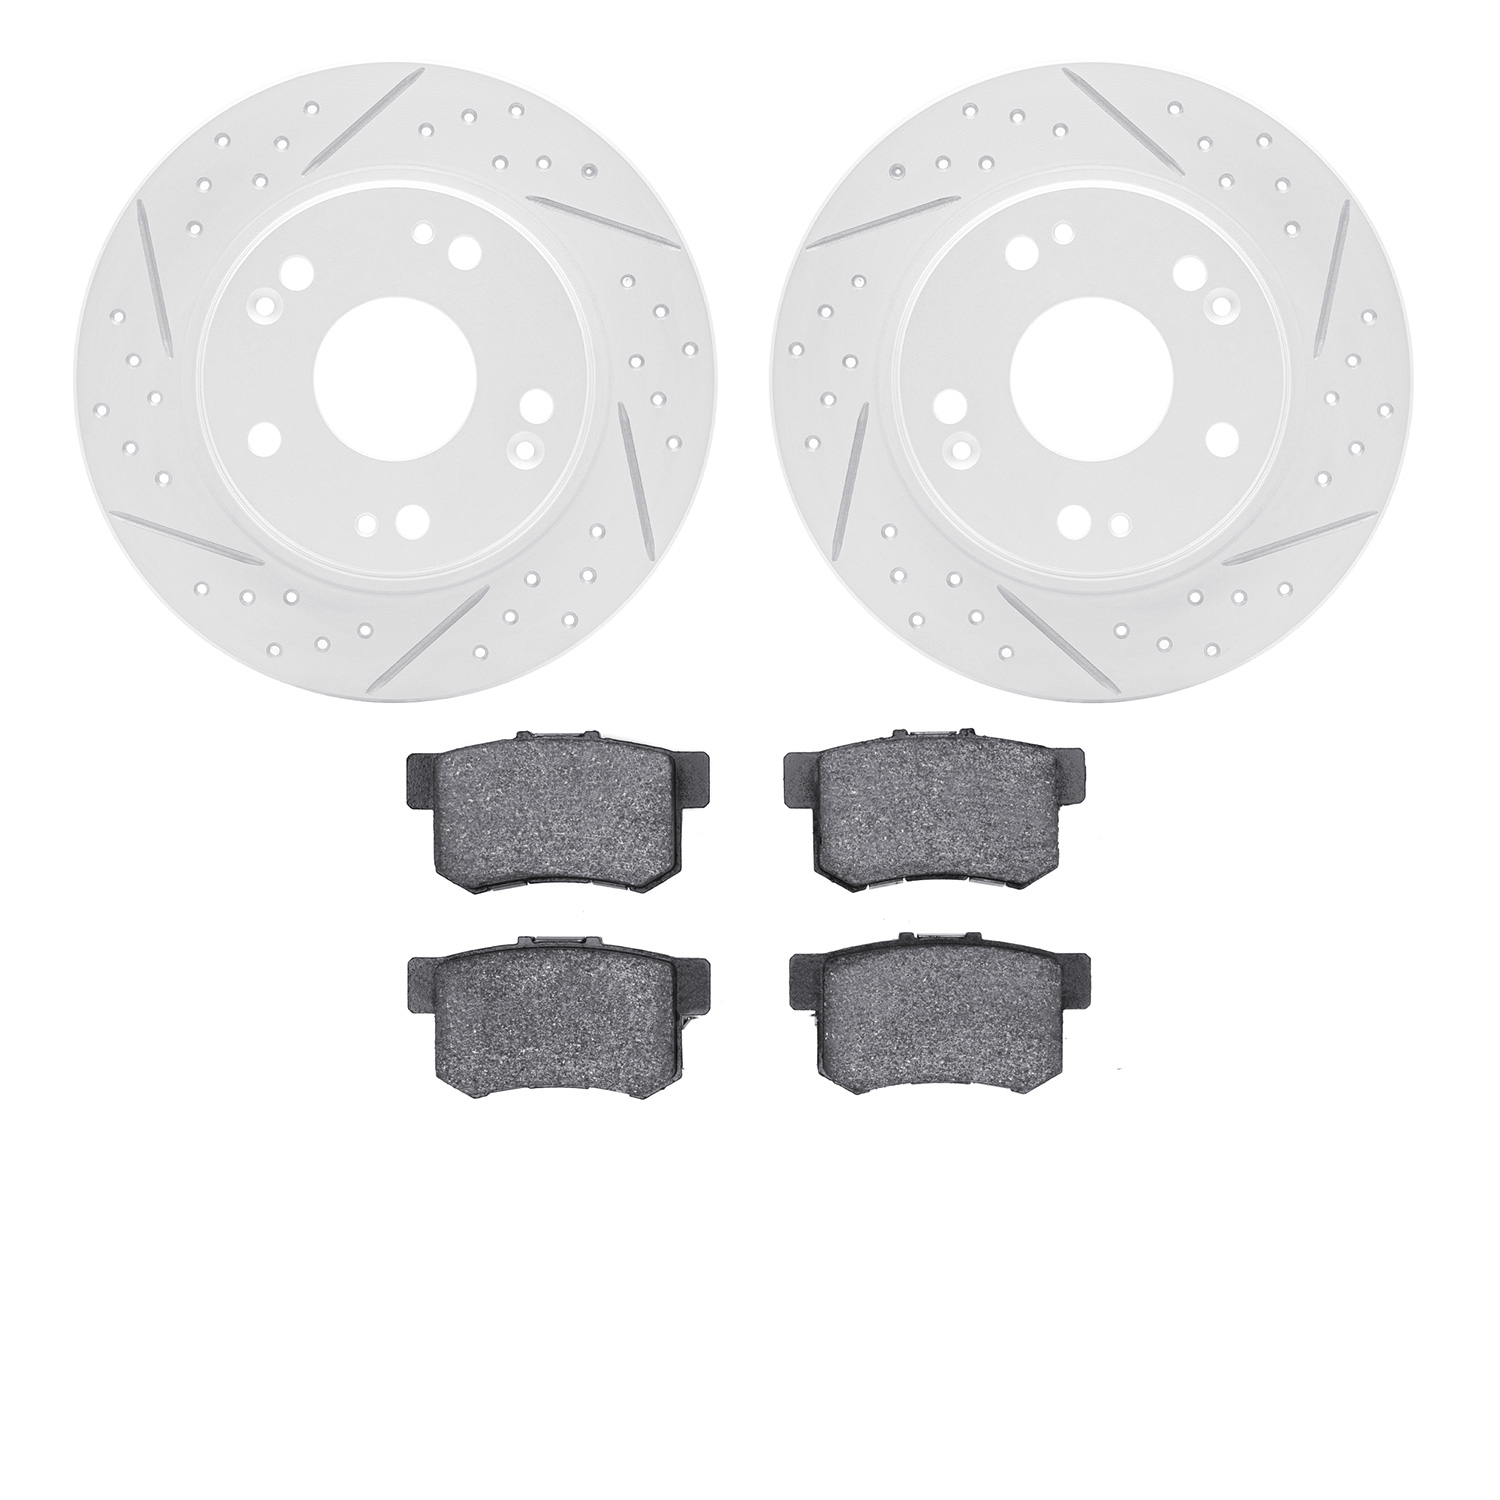 2502-59037 Geoperformance Drilled/Slotted Rotors w/5000 Advanced Brake Pads Kit, 2011-2015 Acura/Honda, Position: Rear